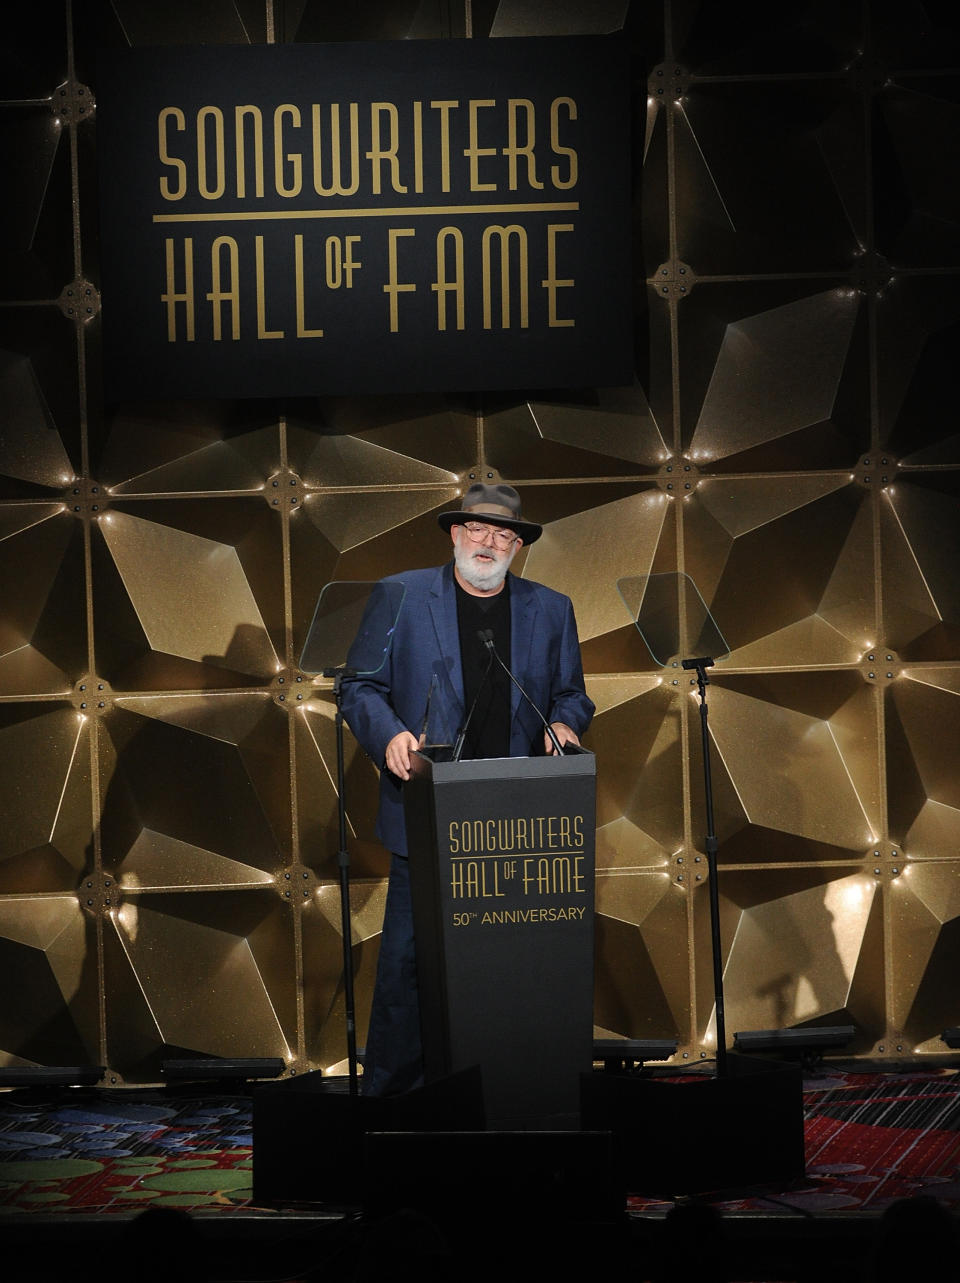 Jack Tempchin performs on stage at the 50th annual Songwriters Hall of Fame induction and awards ceremony at the New York Marriott Marquis Hotel on Thursday, June 13, 2019, in New York. (Photo by Brad Barket/Invision/AP)